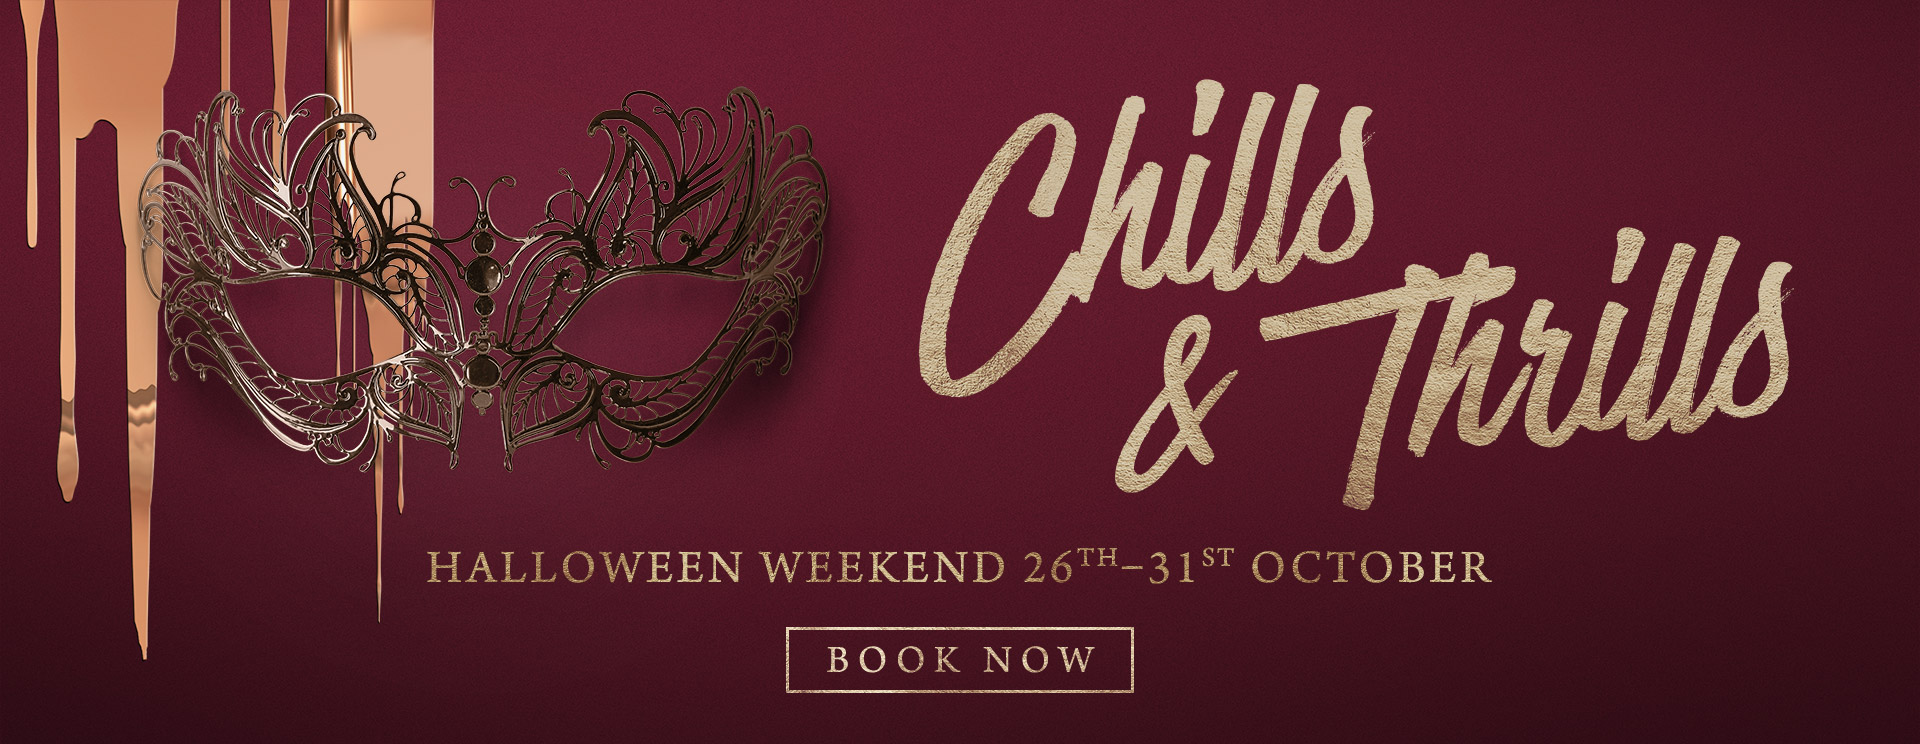 Chills & Thrills this Halloween at The Cromwell Cottage